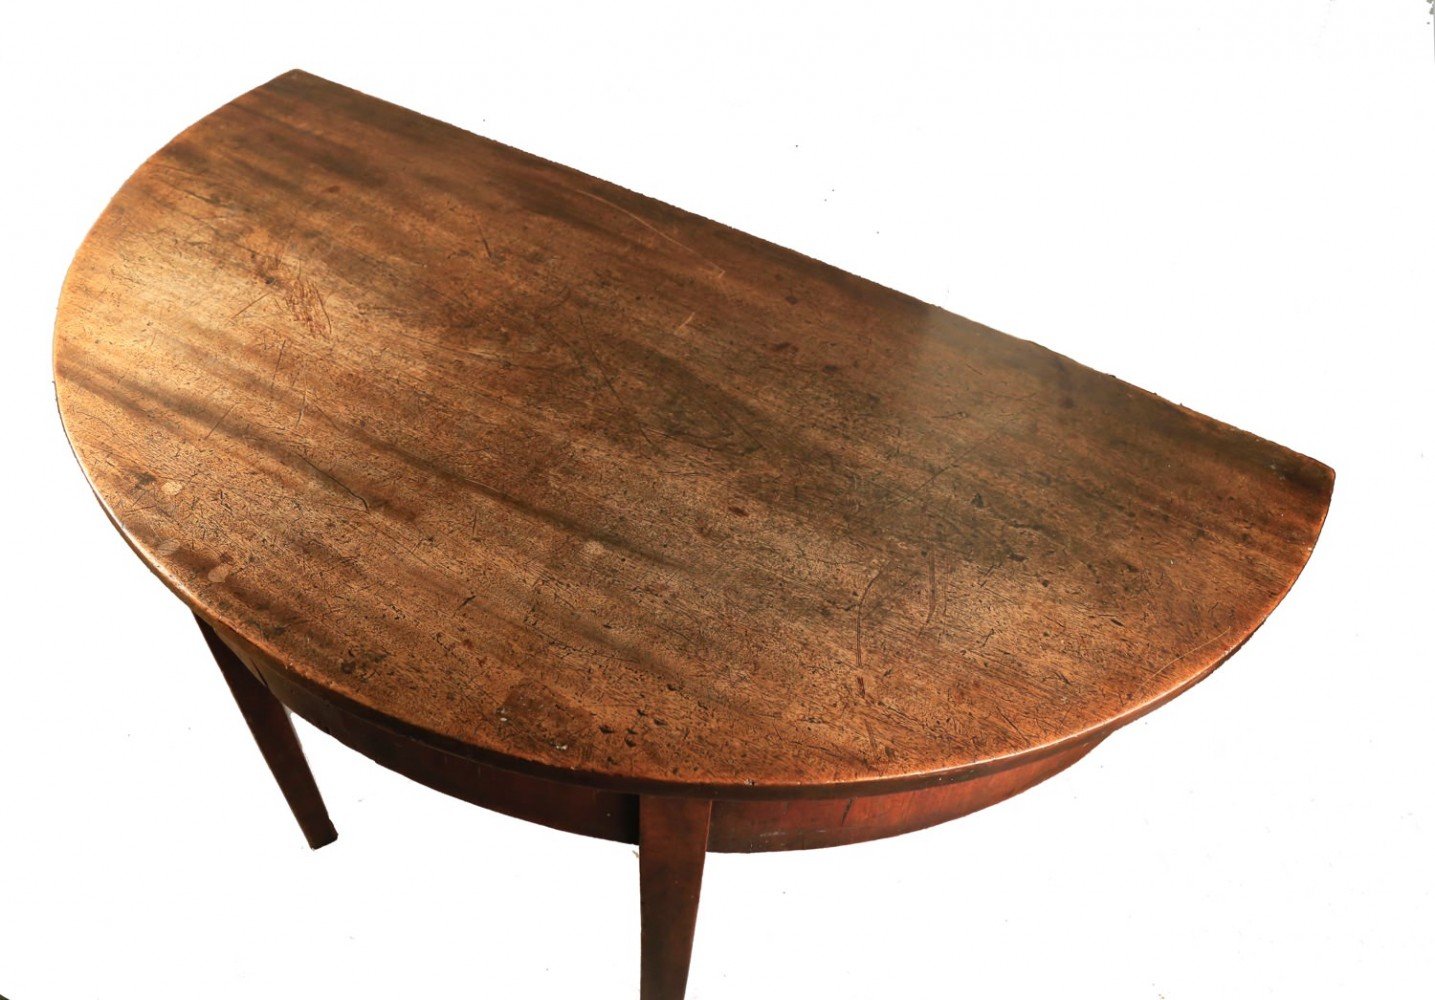 Early 18thc. An English Mahogany Demilune Table